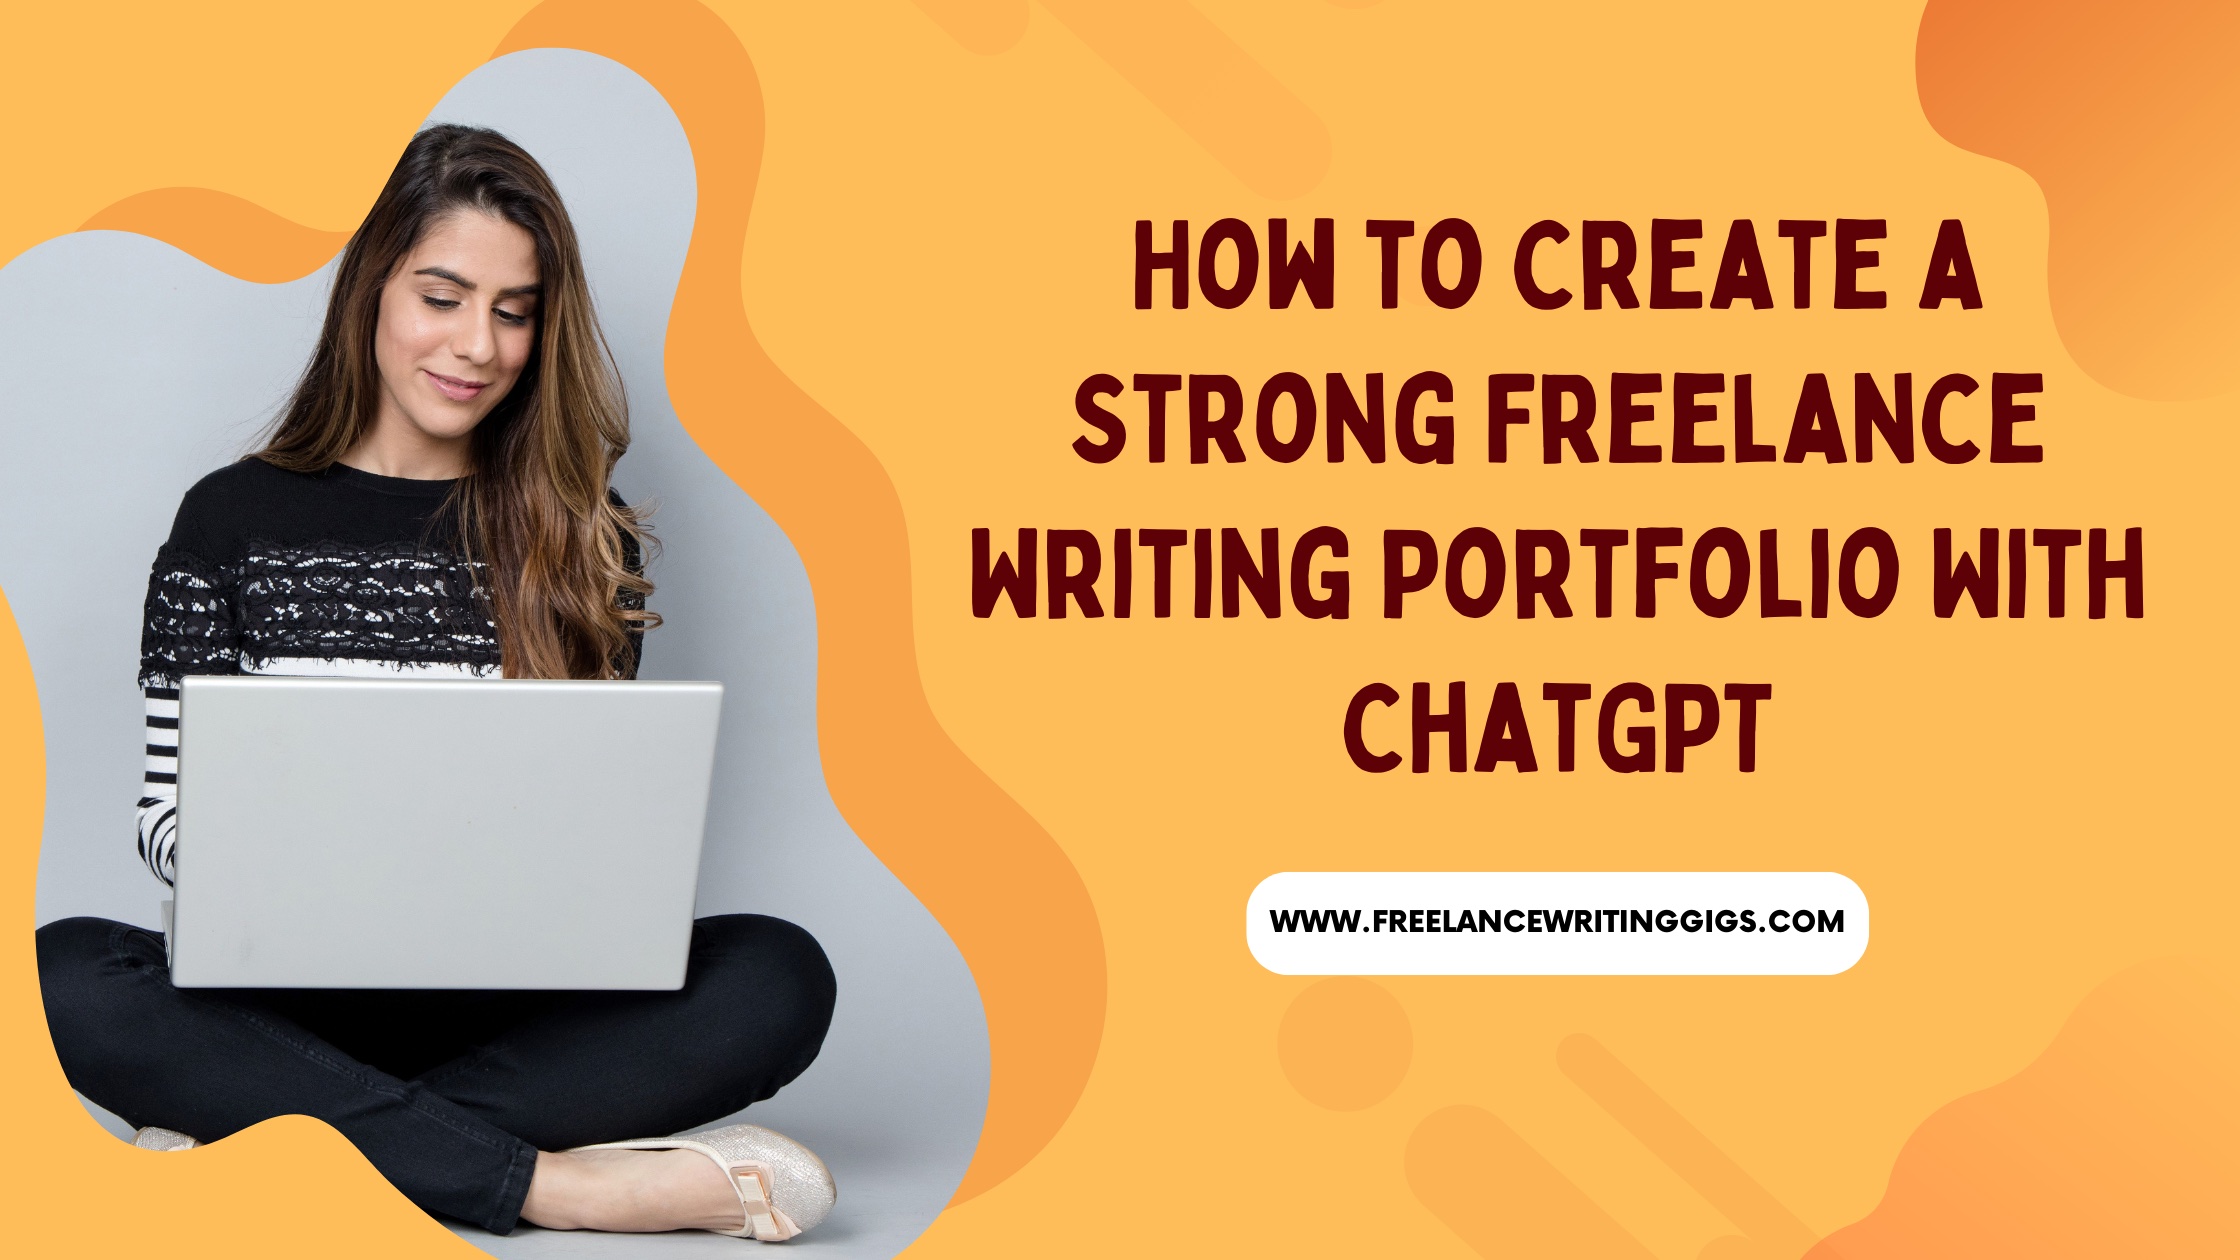 How to Create a Strong Freelance Writing Portfolio With ChatGPT